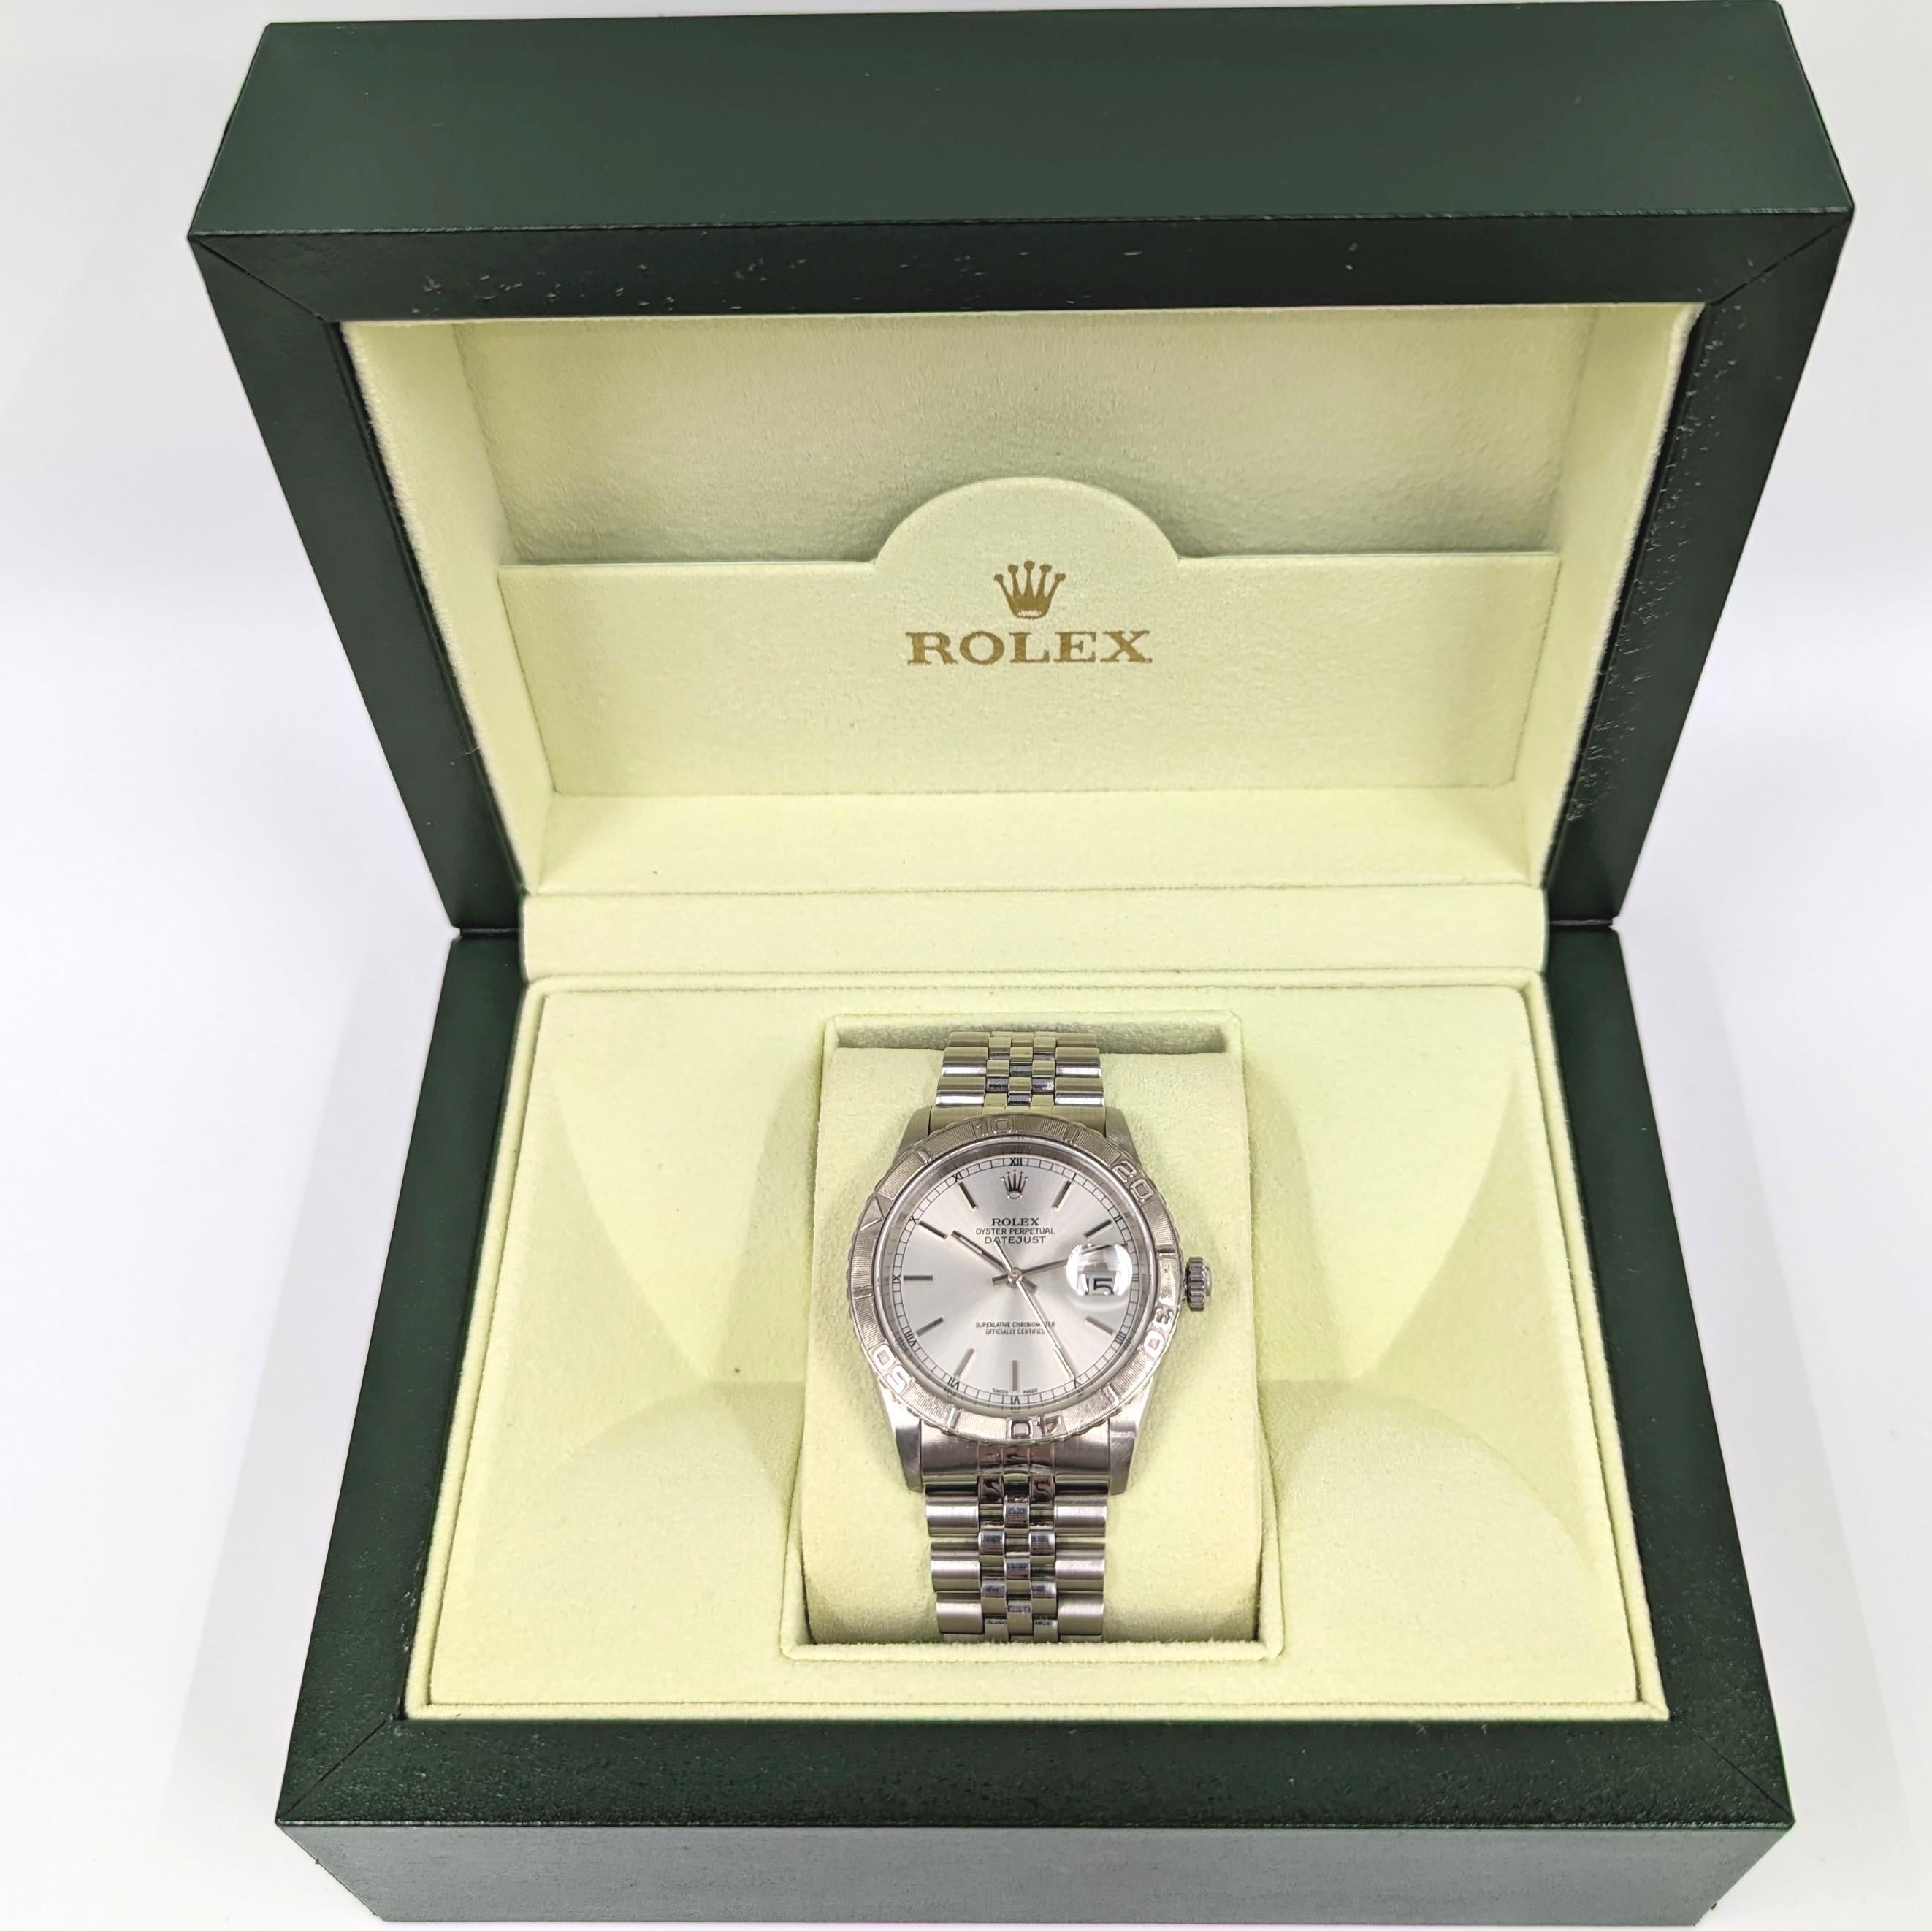 Rolex Oyster Perpetual Datejust 18k WG/SS Turn-o-graph Watch Thunderbird 16264 For Sale 2